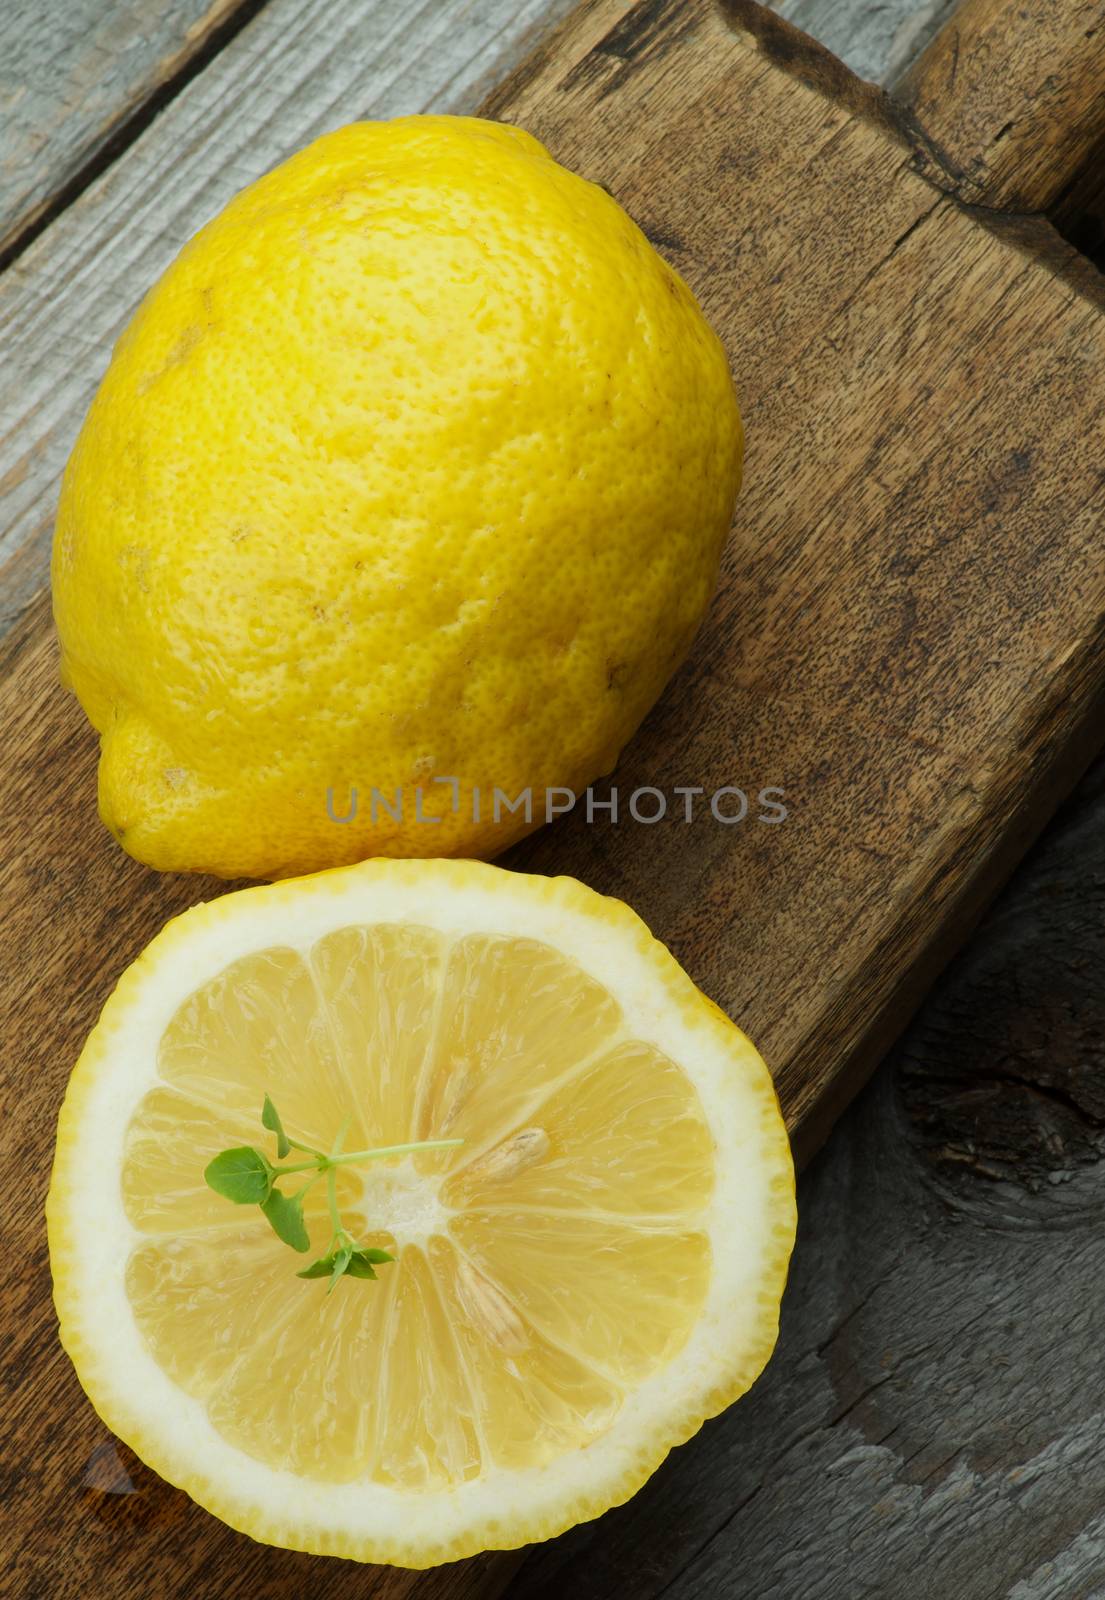 Ripe Raw Lemons Full Body and Half on Wooden Cutting Board on Rustic background